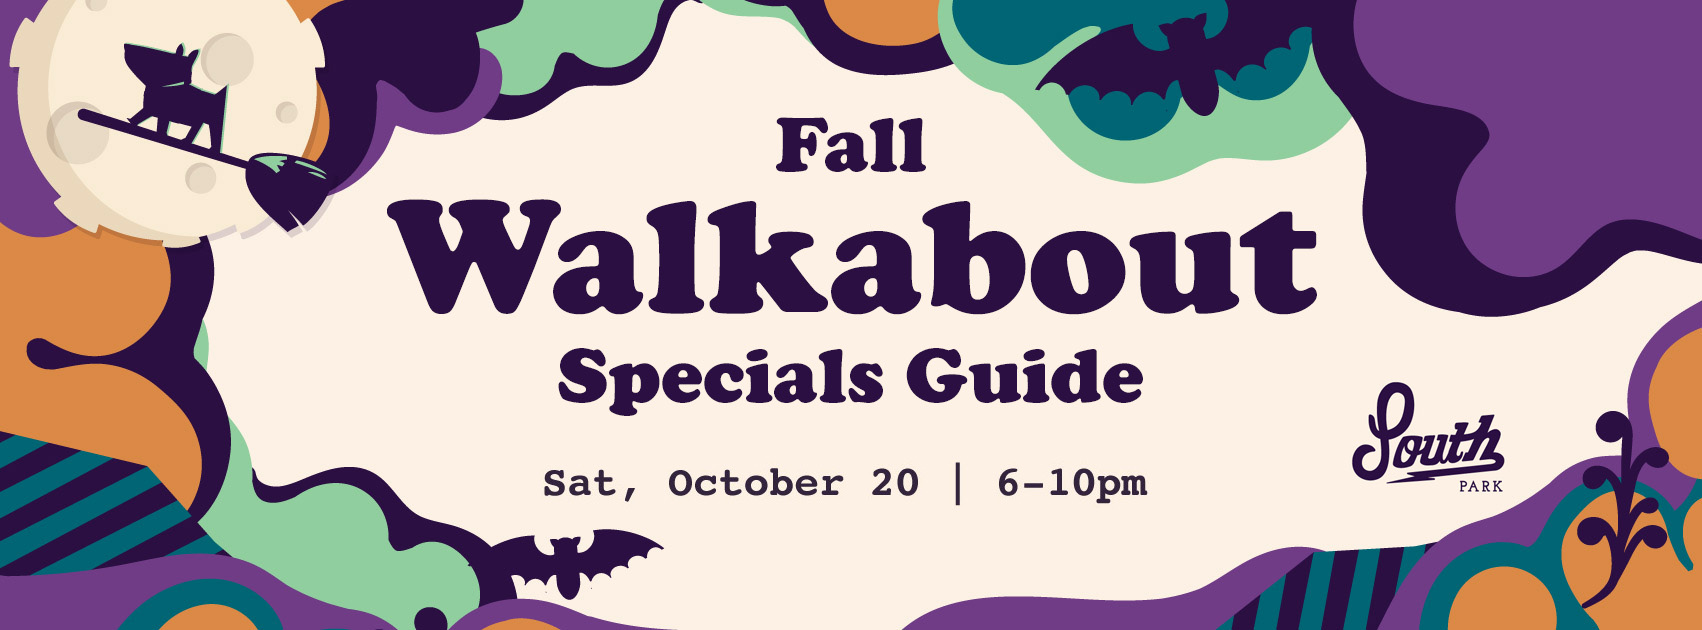 Fall Walkabout Specials - South Park, San Diego Official Site